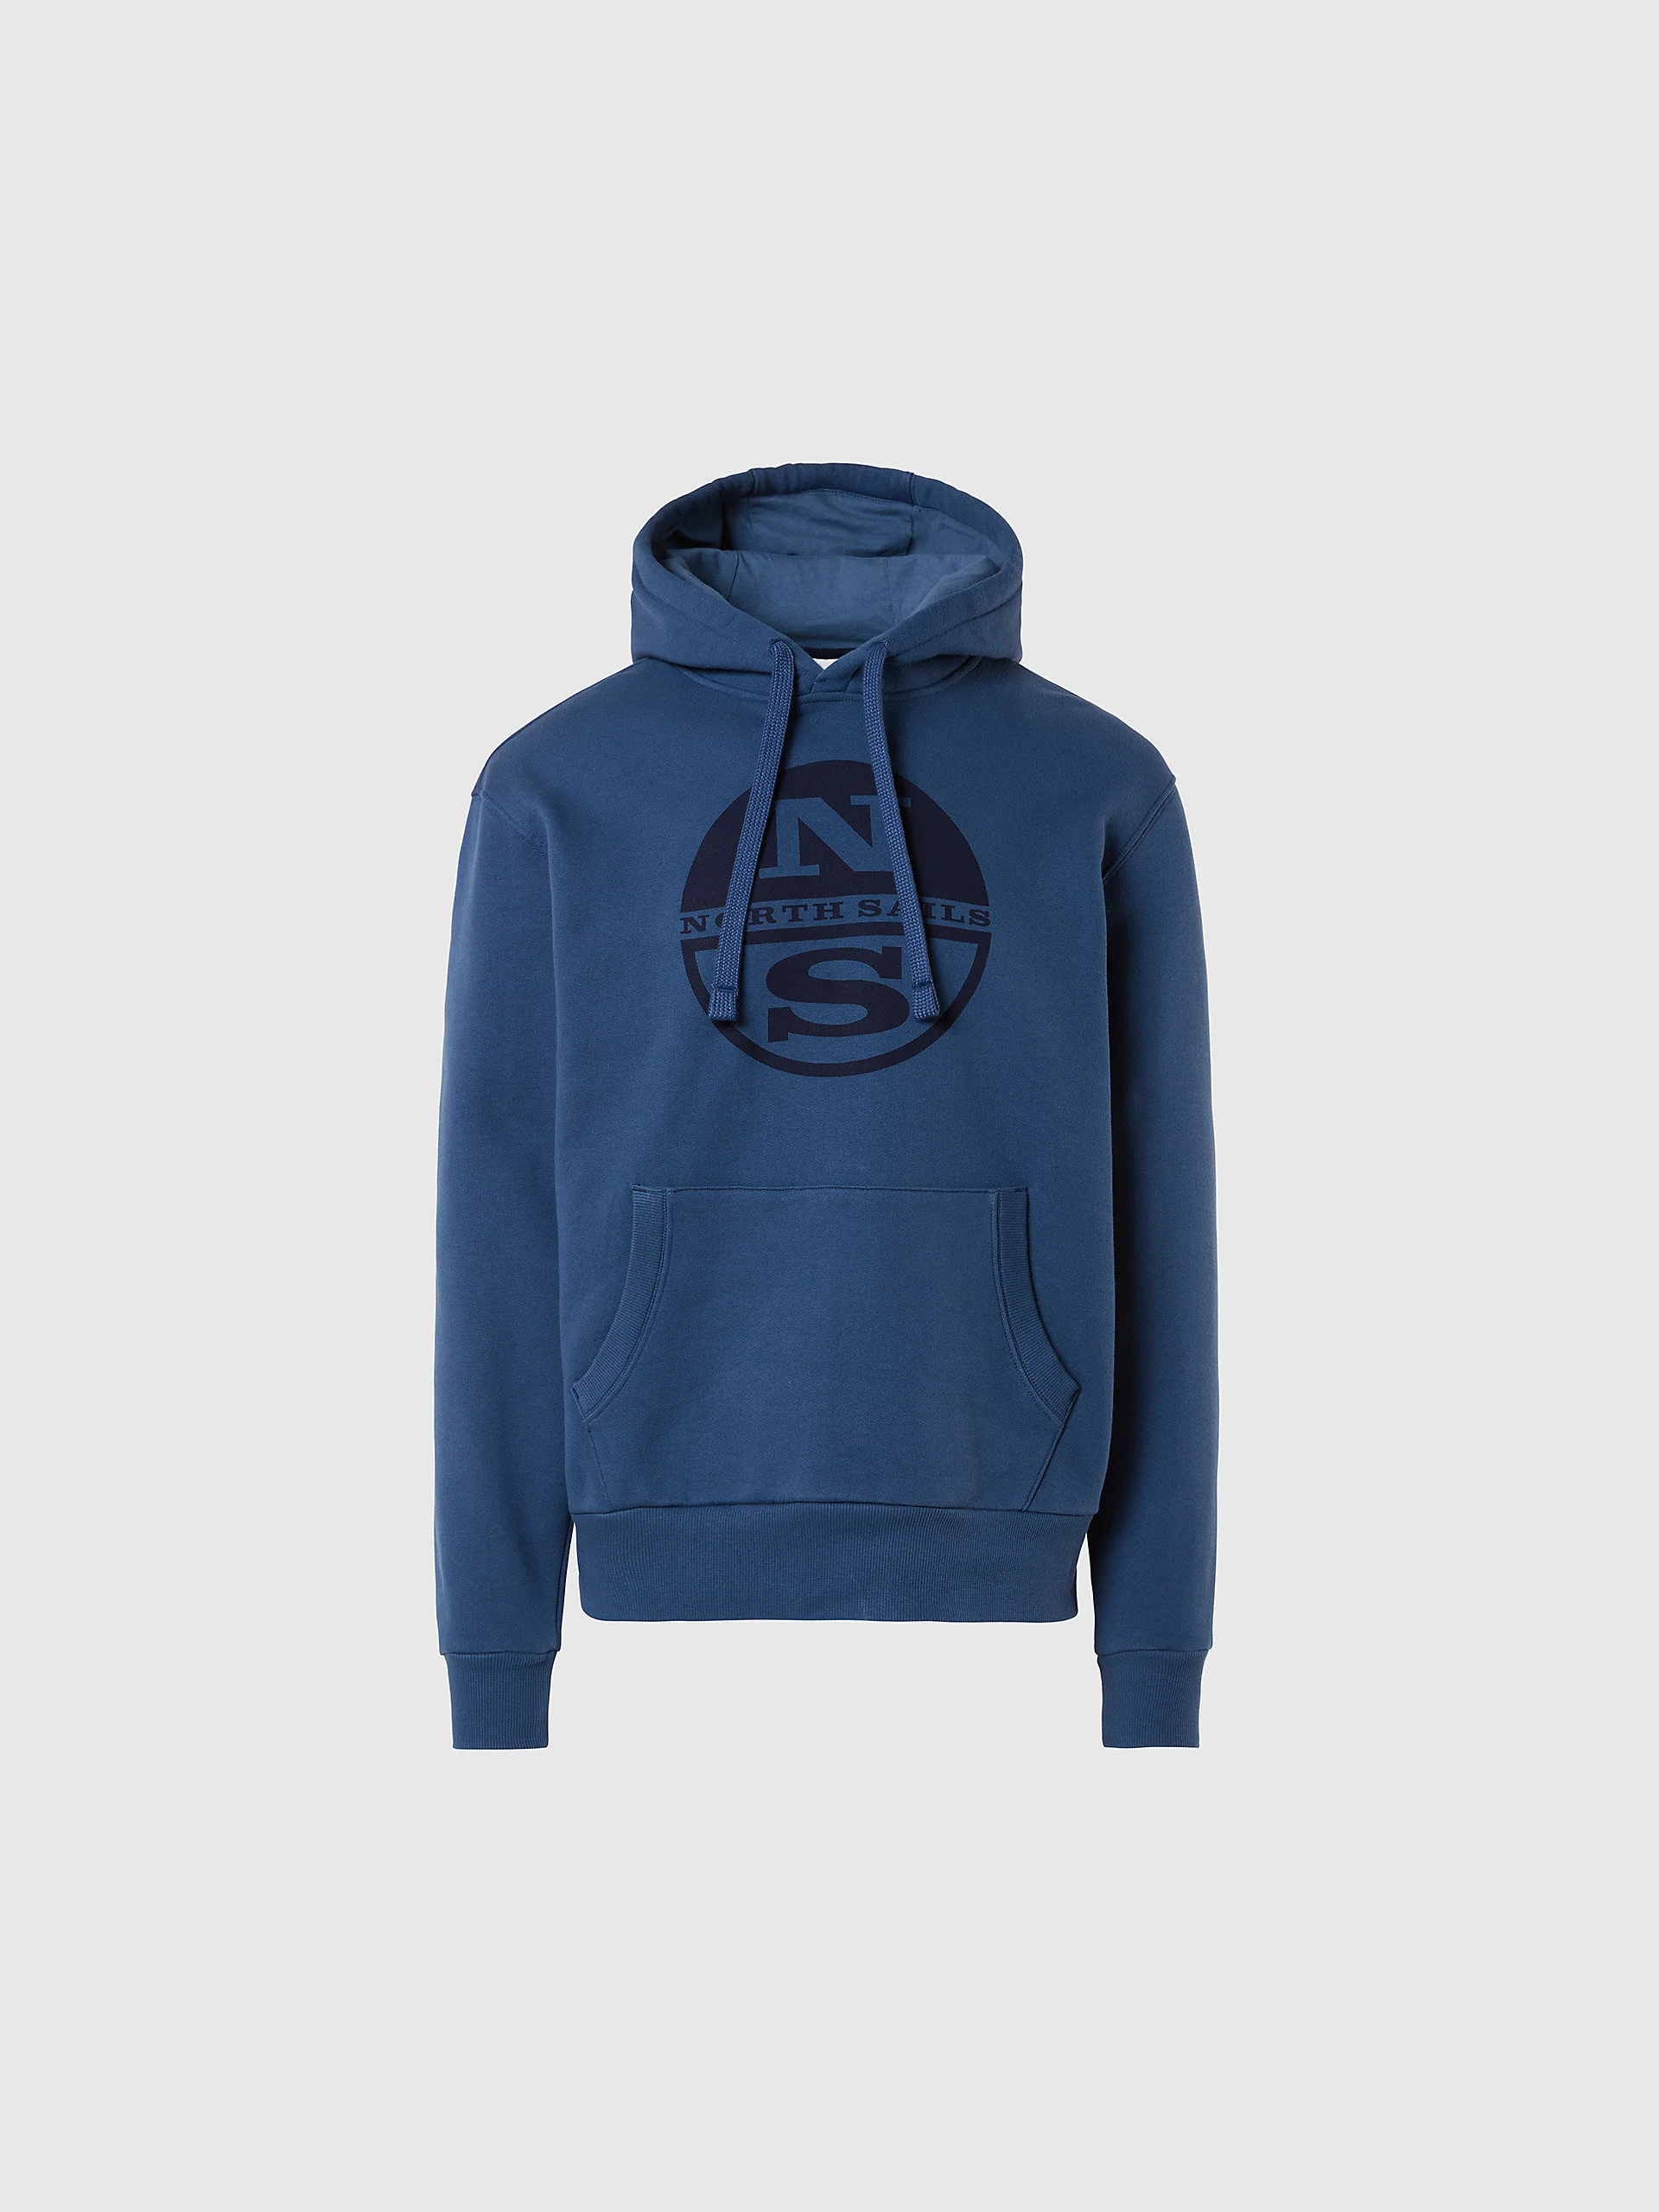 North Sails hooded seatshirt with graphic winter sea